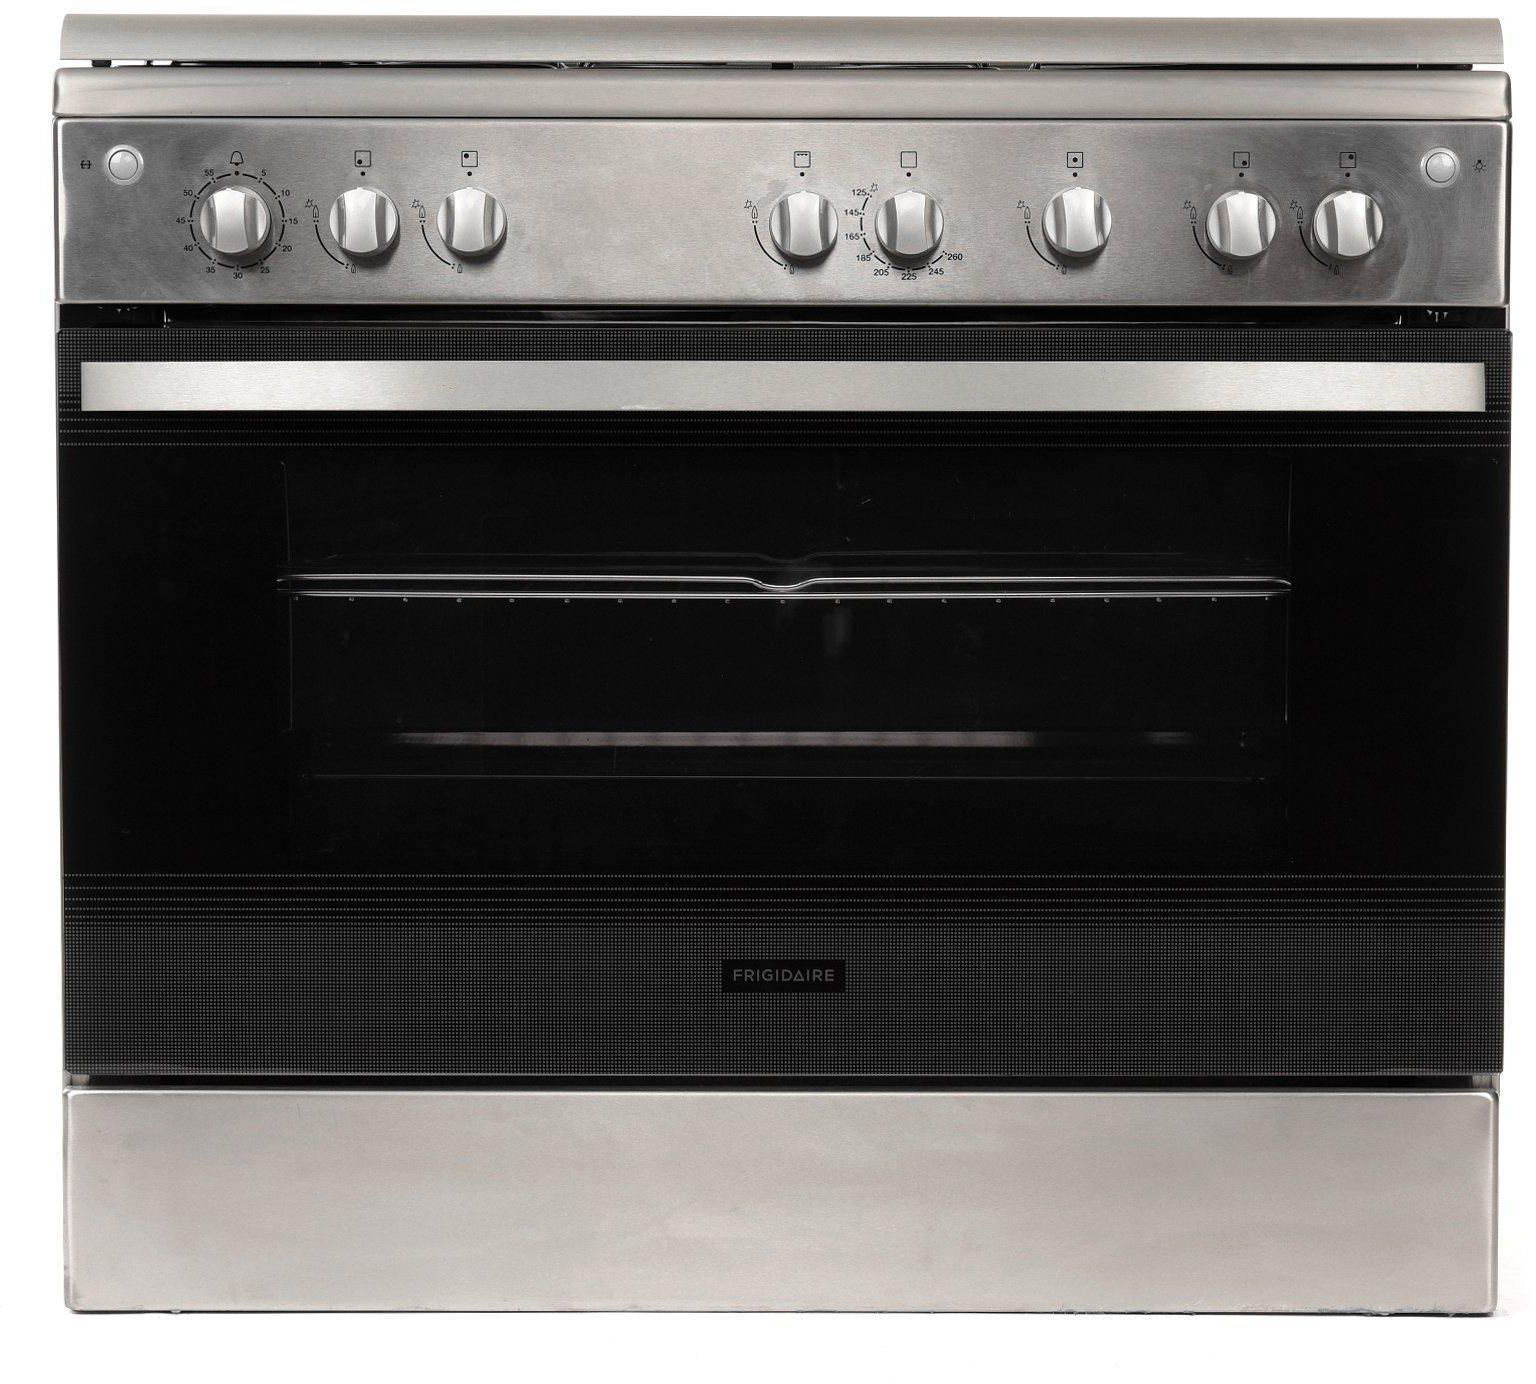 Frigidaire Free Standing Gas Cooker 90X60, Full Safety, Black